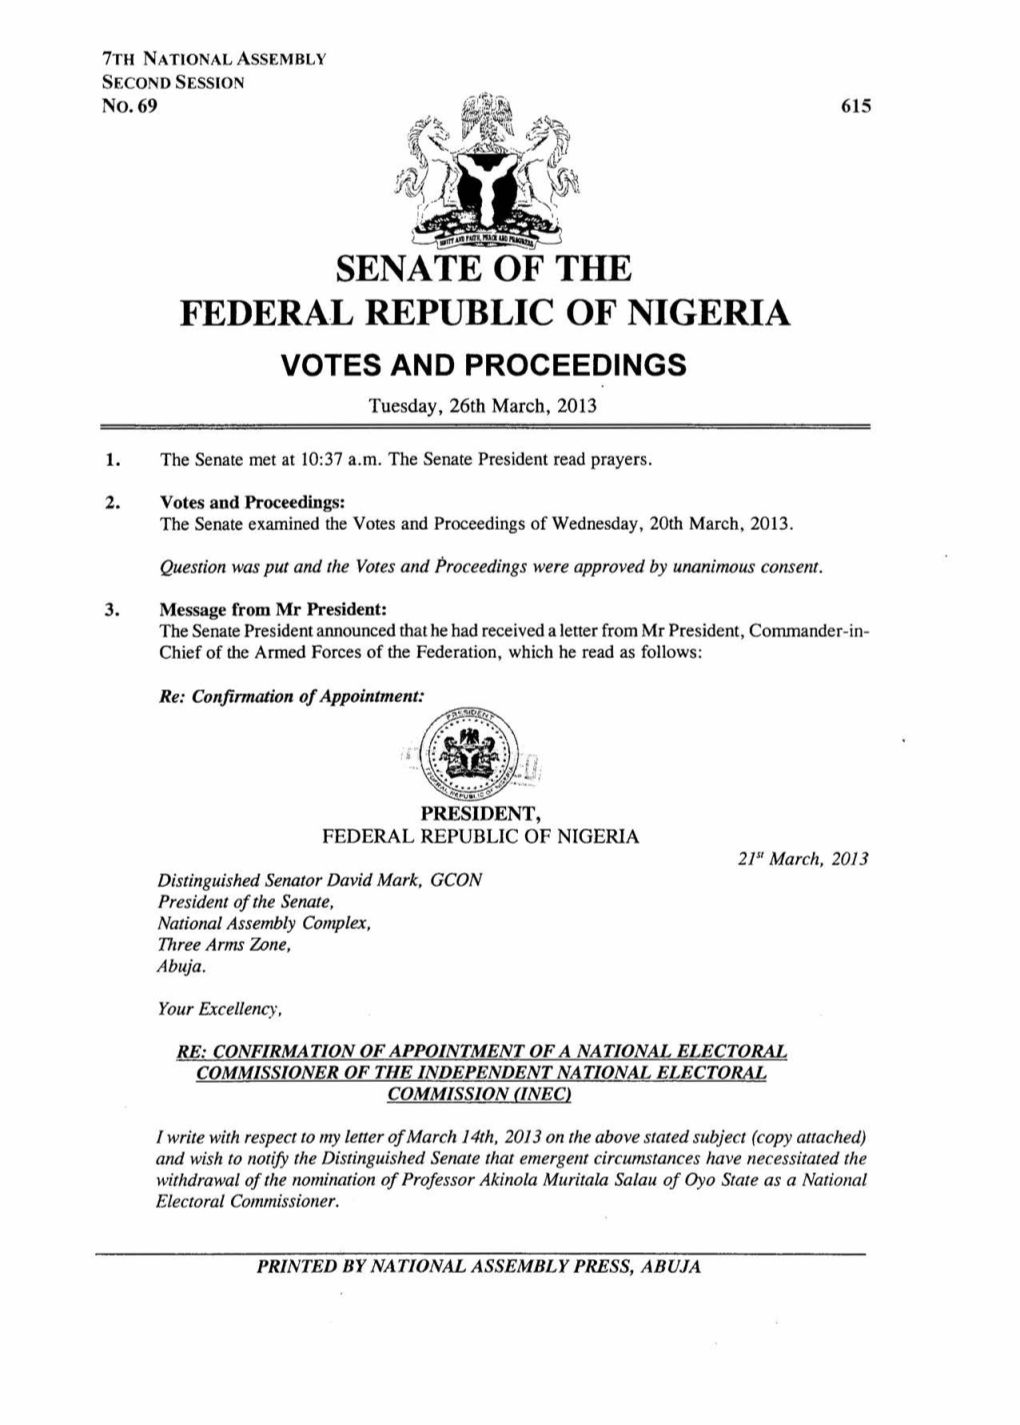 Senate of the Federal Republic of Nigeria Votes and Proceedings